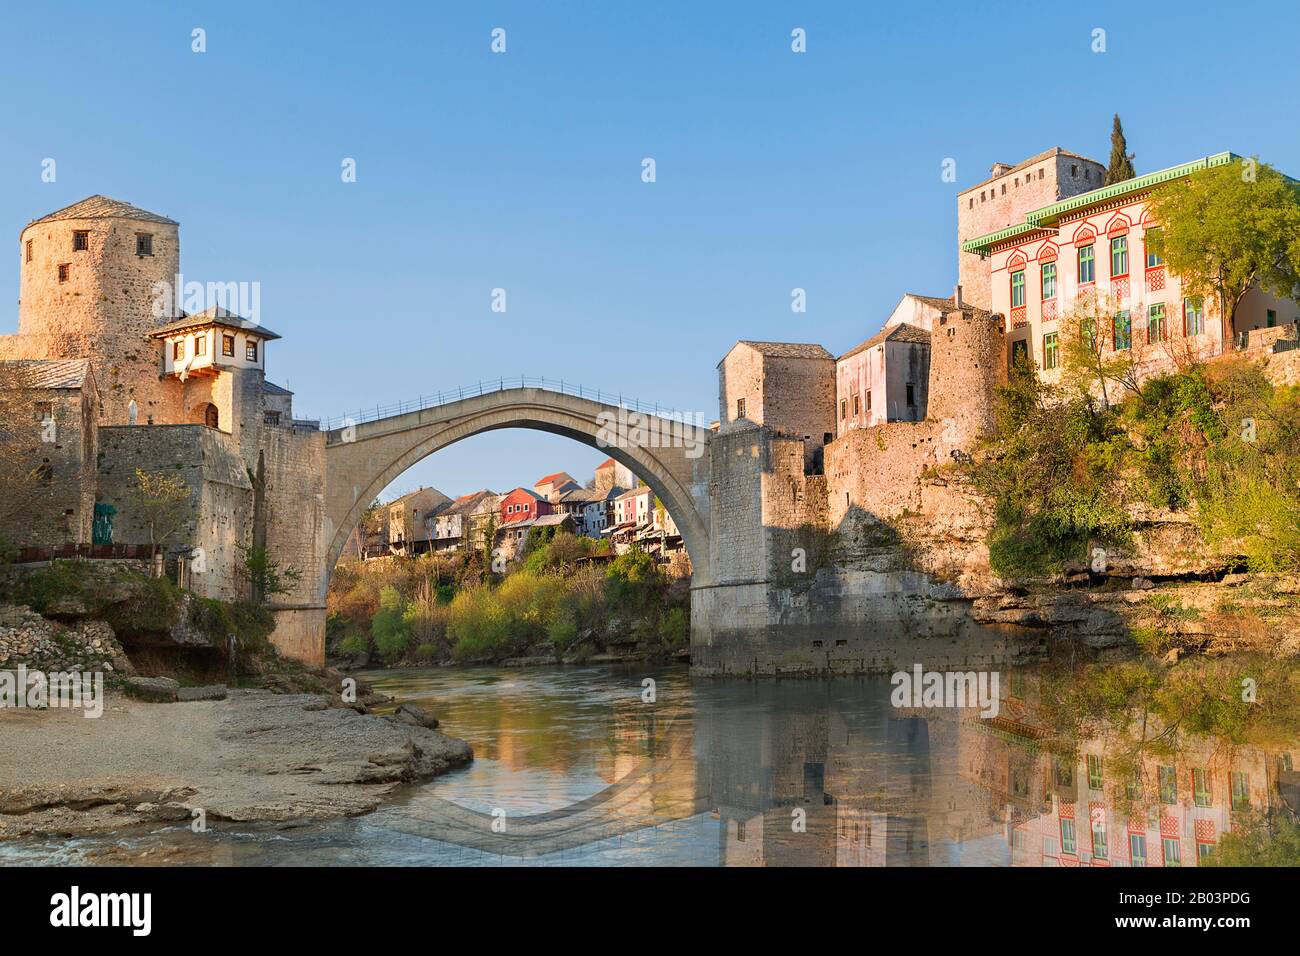 Historical Mostar Bridge in the town of Mostar in Bosnia and Herzegovina Stock Photo